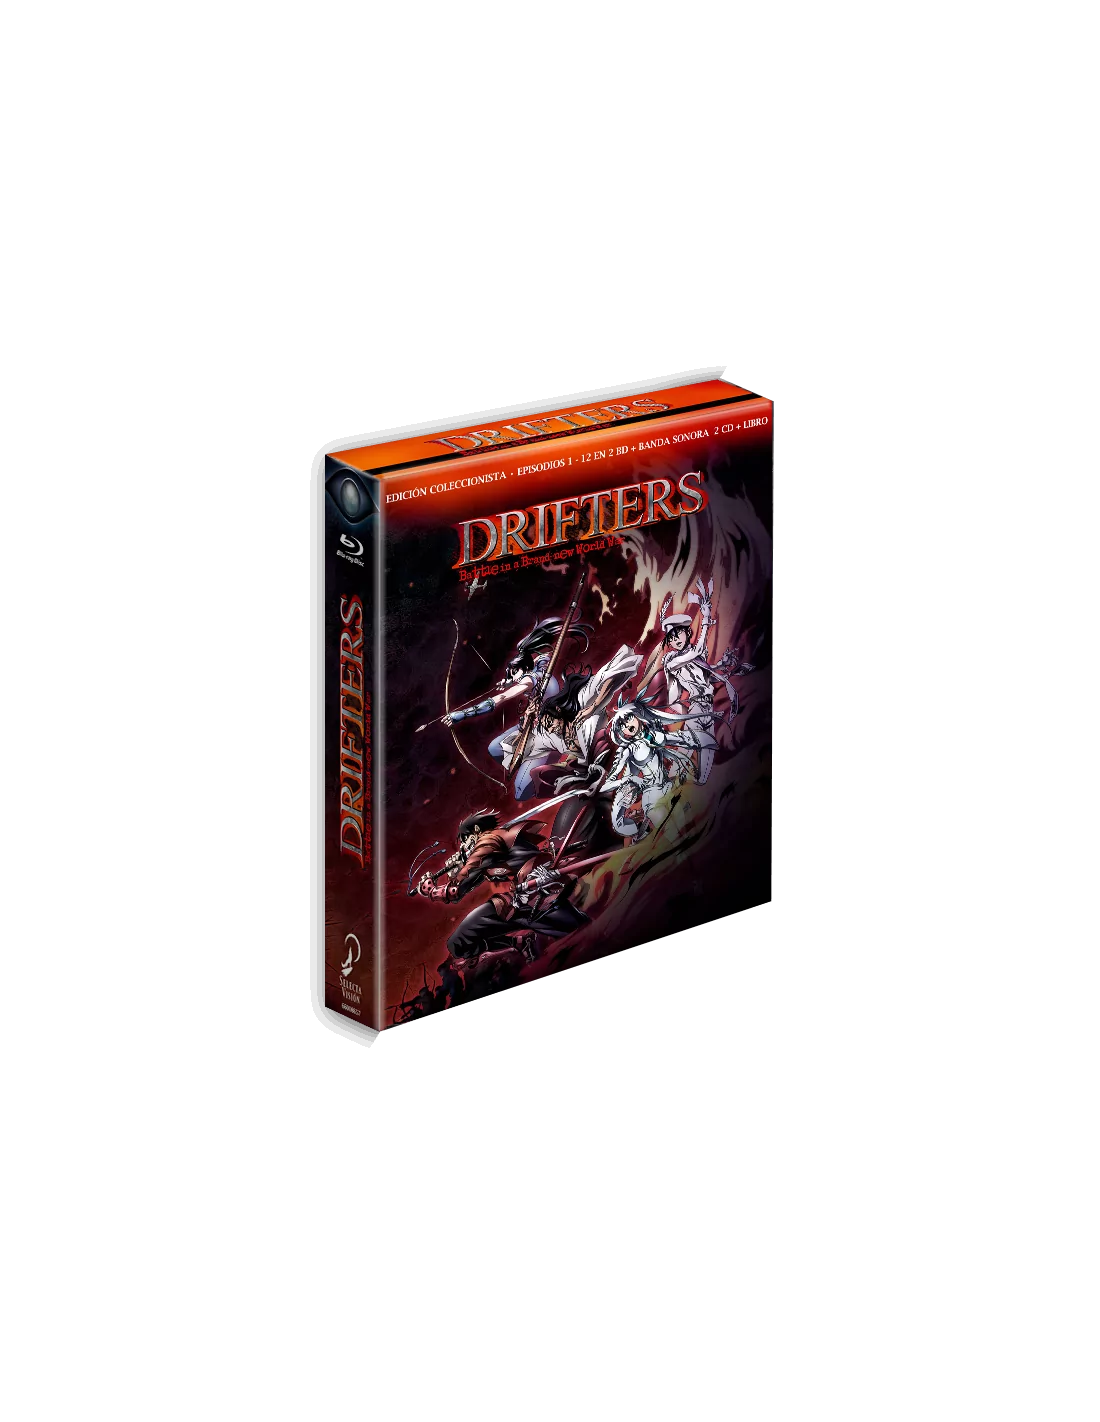 Drifters (Eps 01-12) (Limited Edition Box) (3 Blu-Ray) [Import] : Movies &  TV 